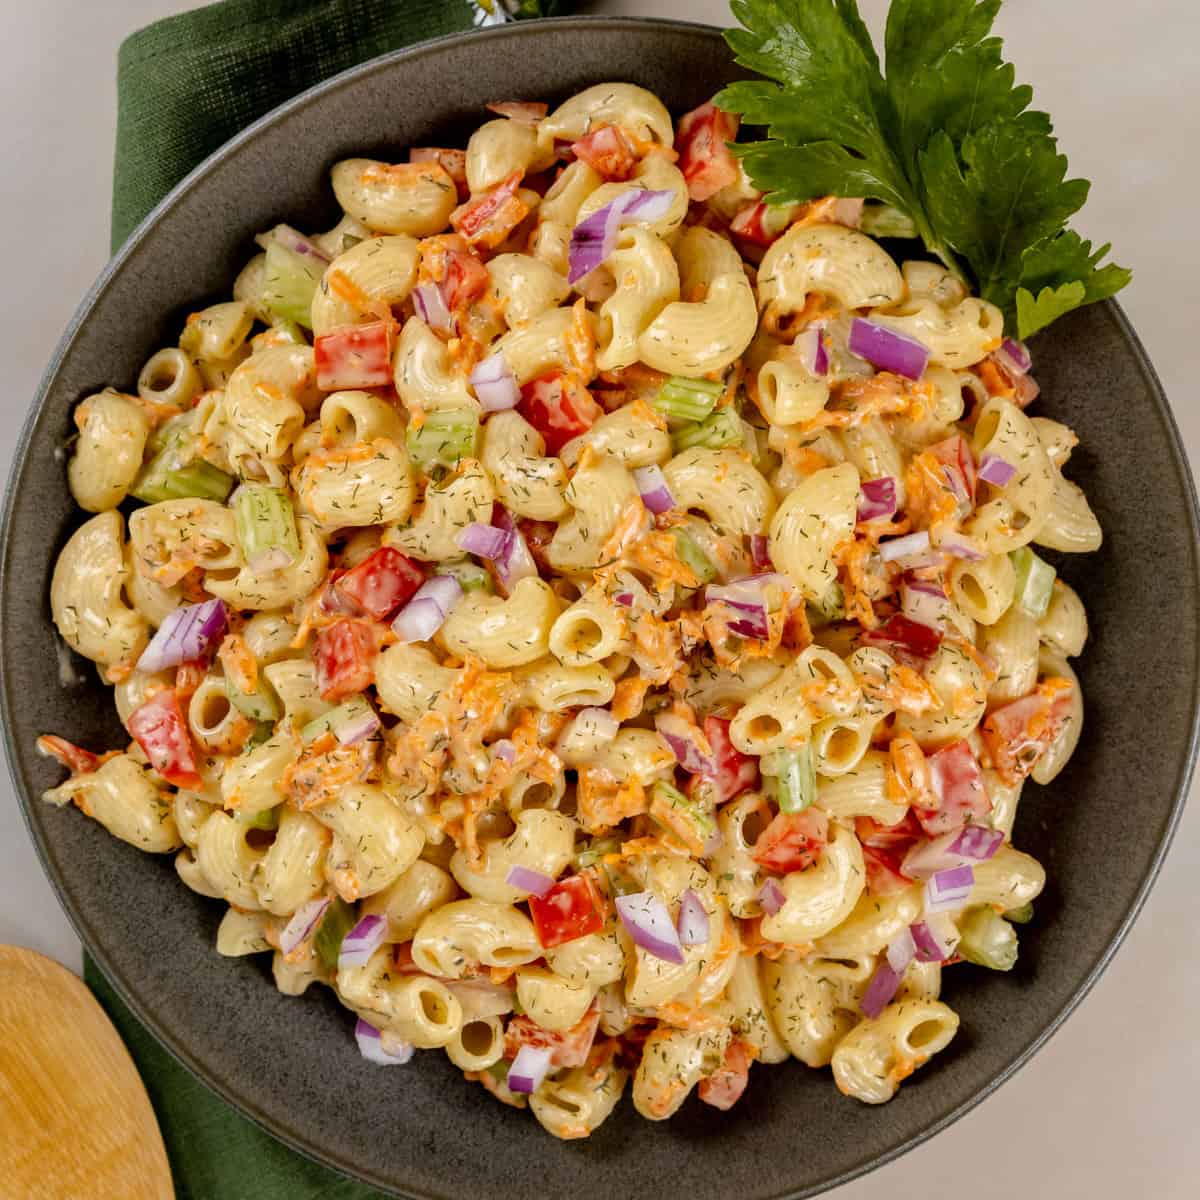 A dark big bowl filled with vegan macaroni salad with creamy dressing. It is resting on a green napkin.